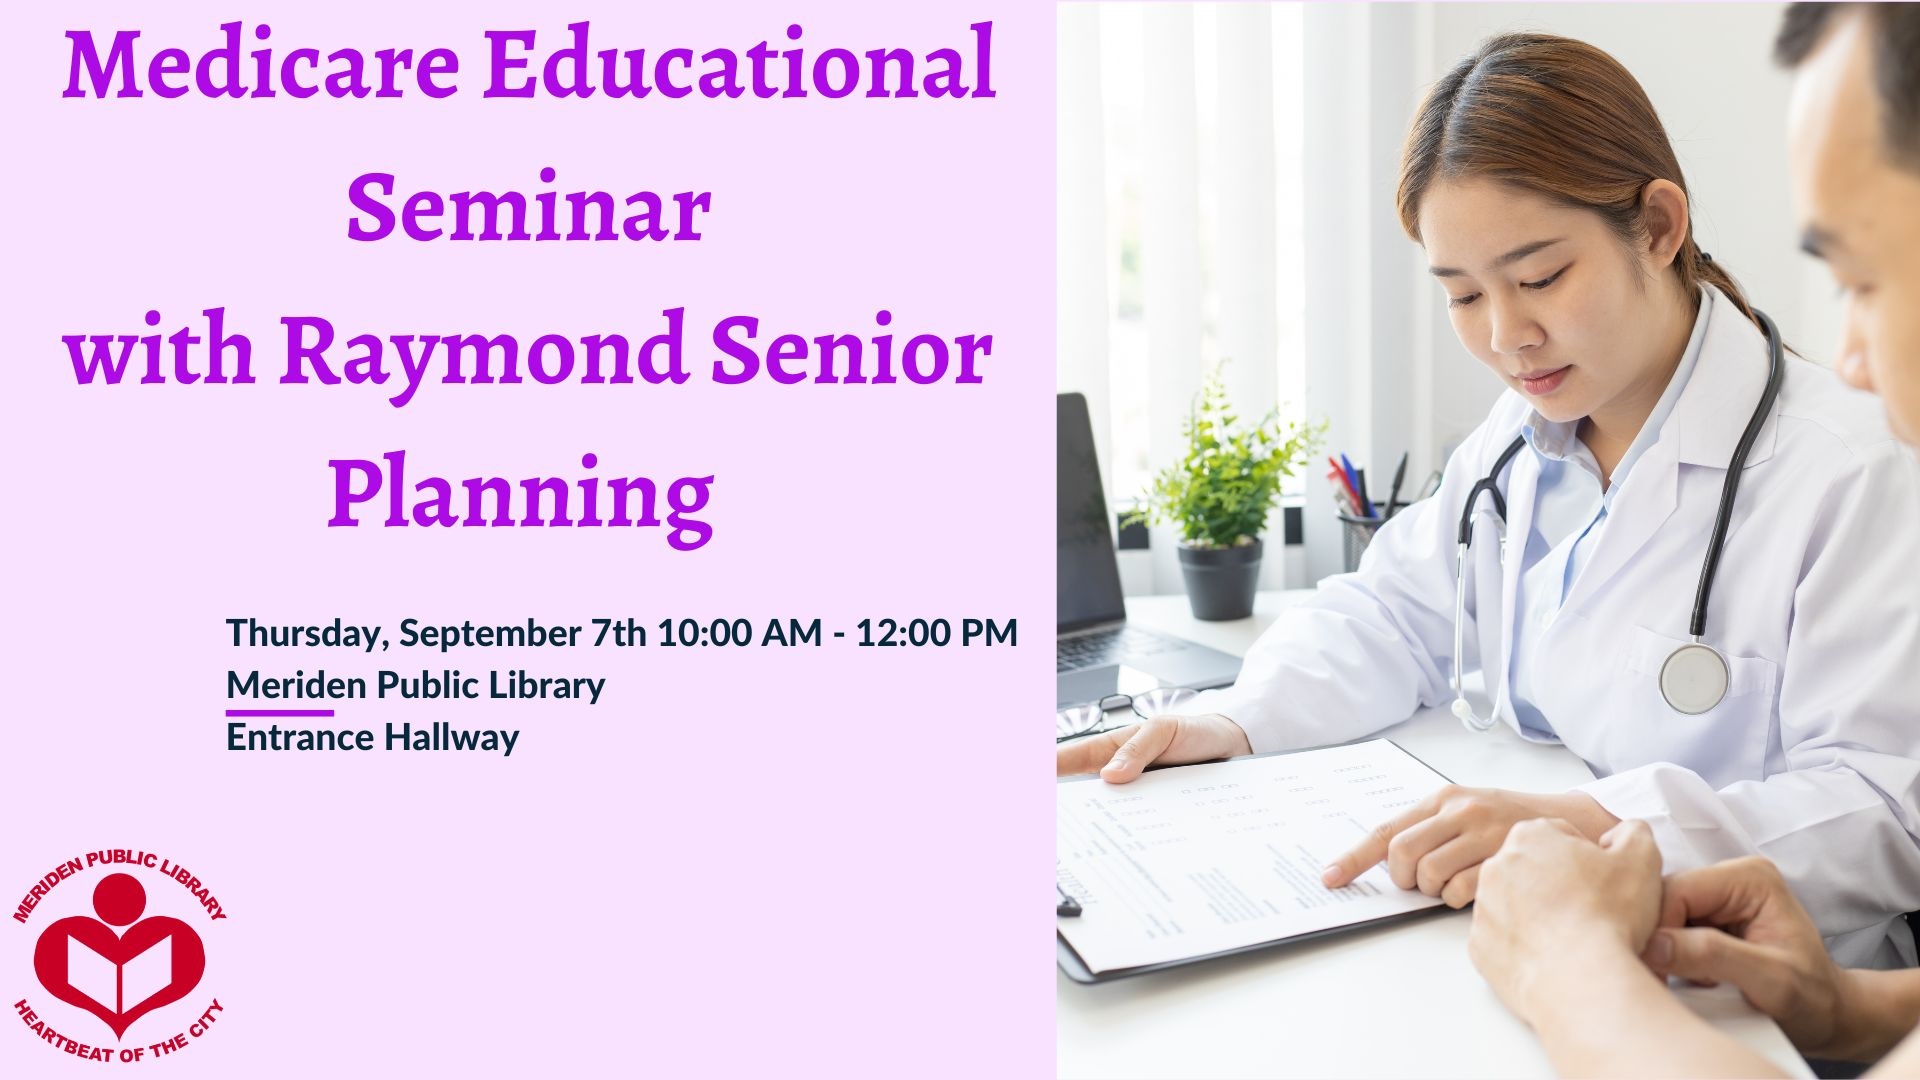 A picture of a doctor going over paperwork with a patron covers the right side of the ad. Medicare Educational Seminar with Raymond Senior Planning is written next to it above the MPL logo.